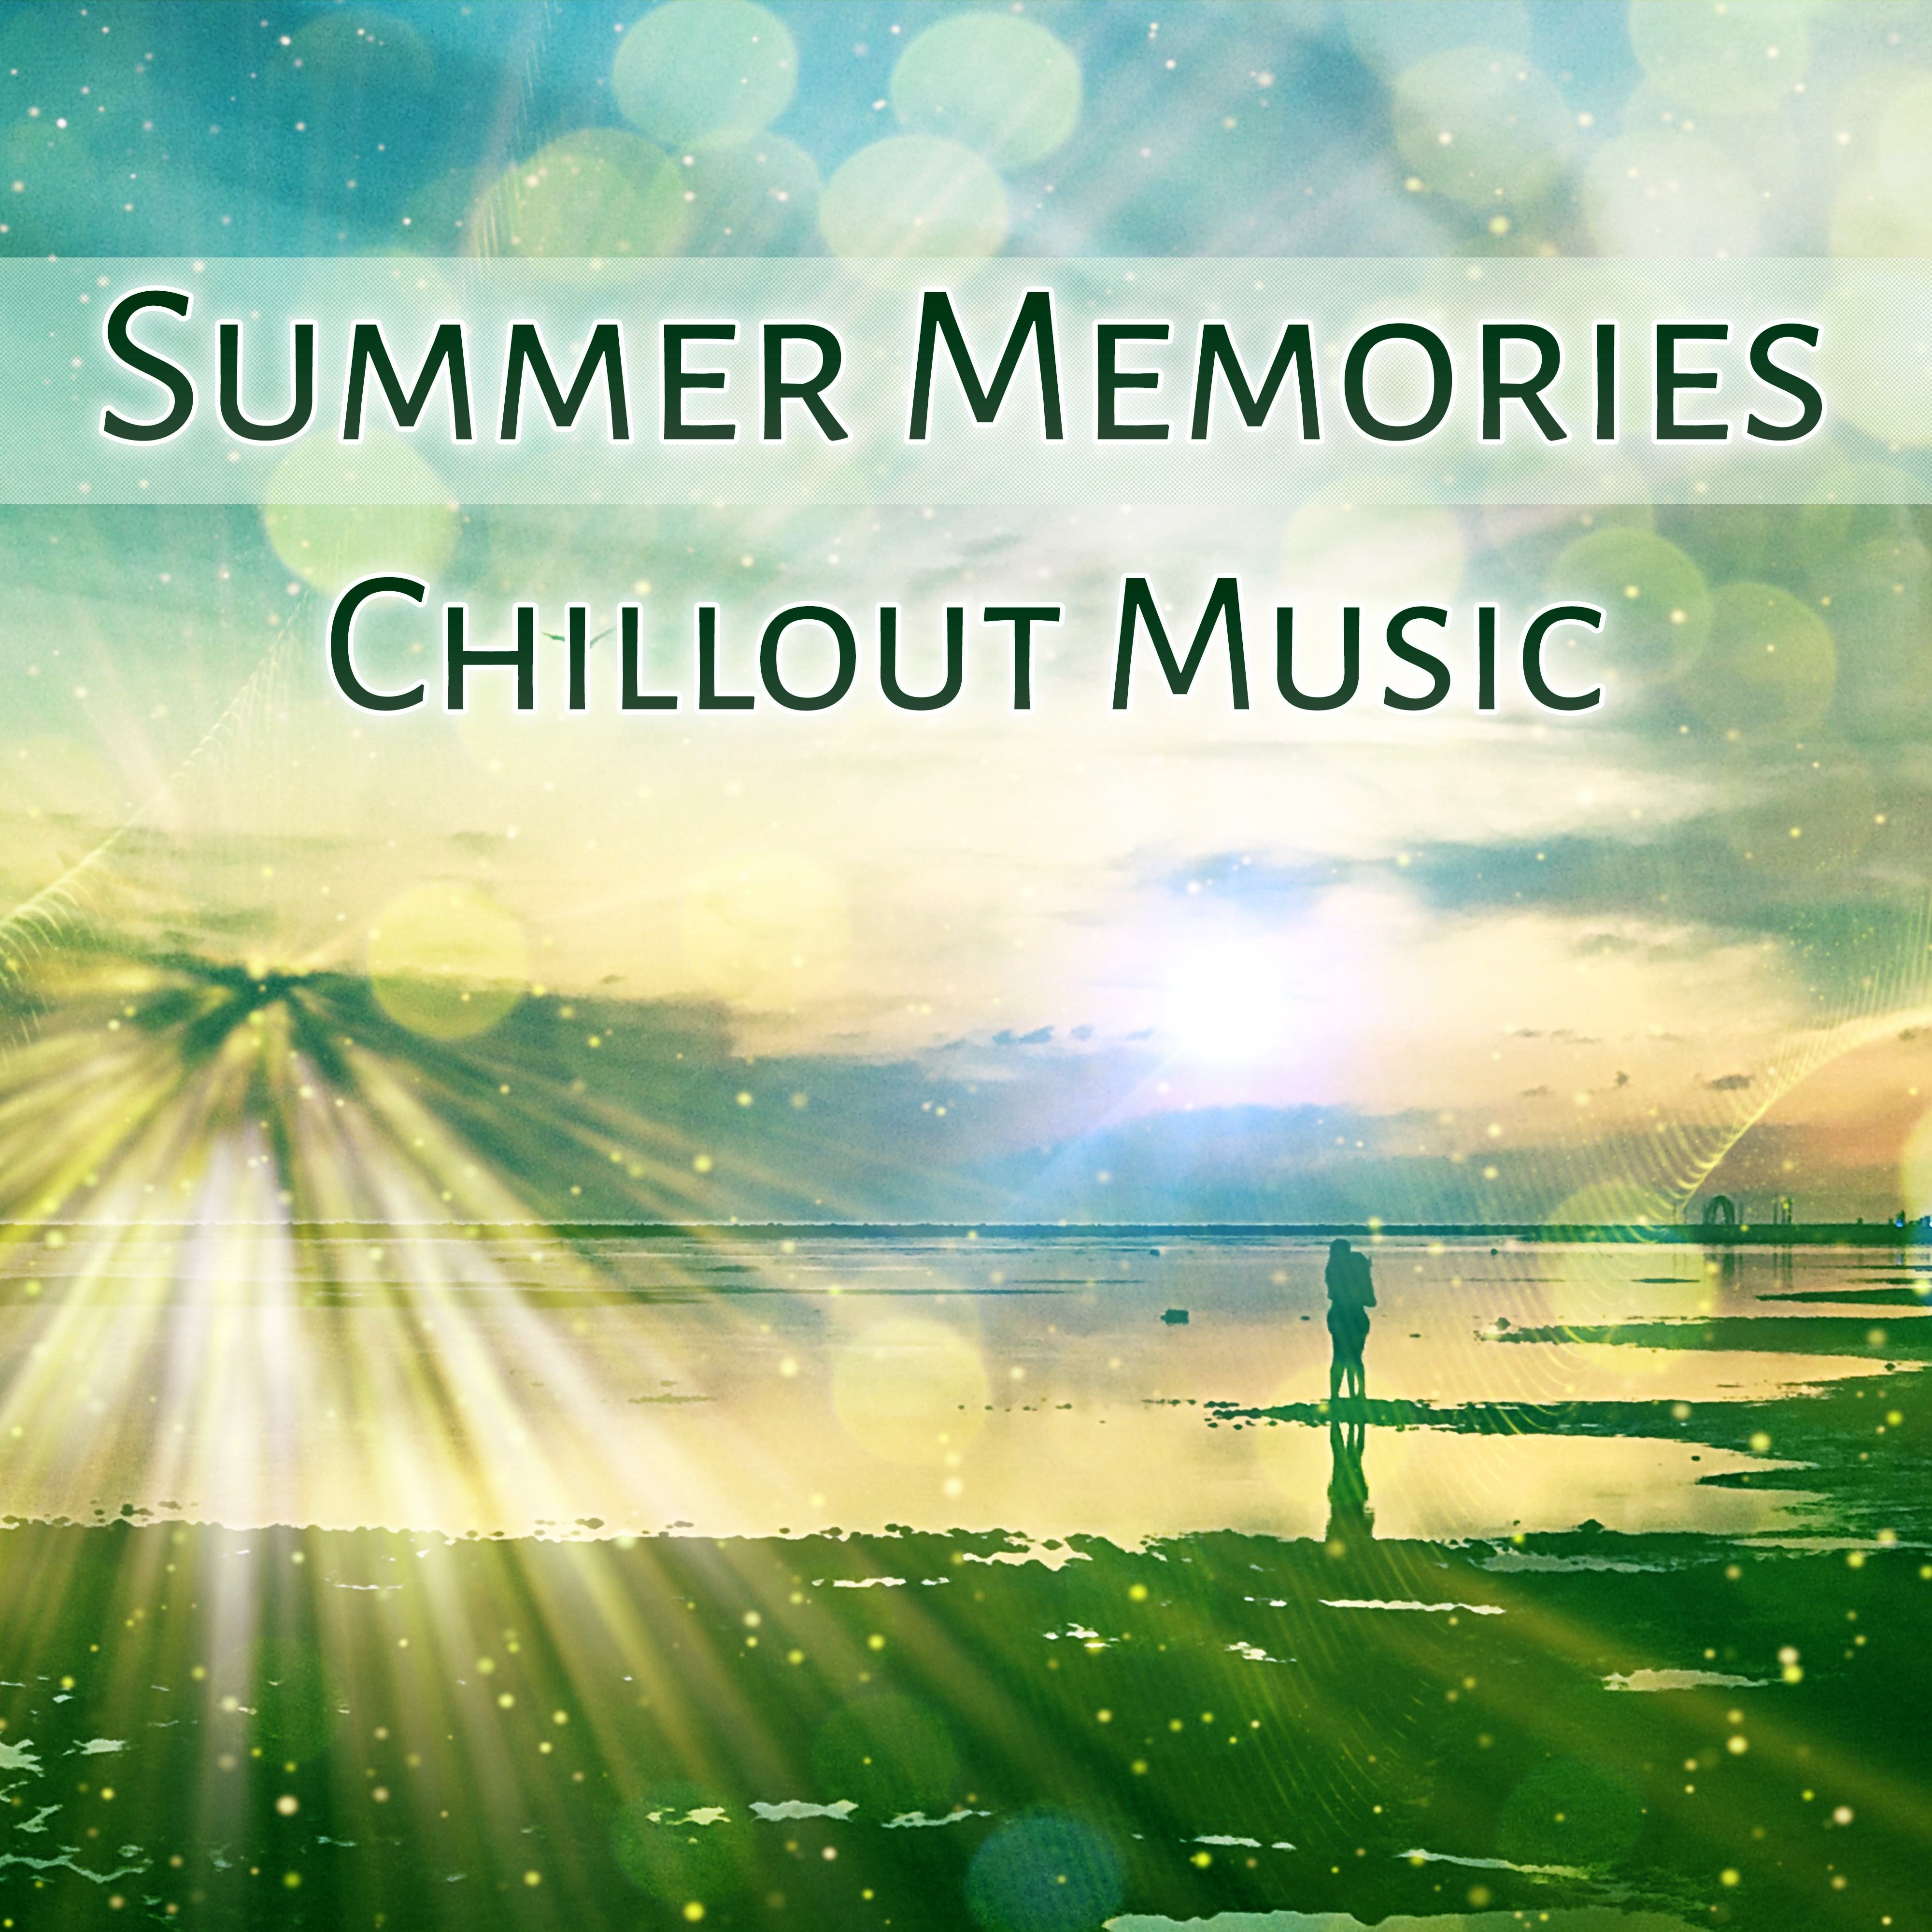 Summer Memories Chillout Music  Deep Chillout, Relax  Chill,  Pure Electronic Sounds